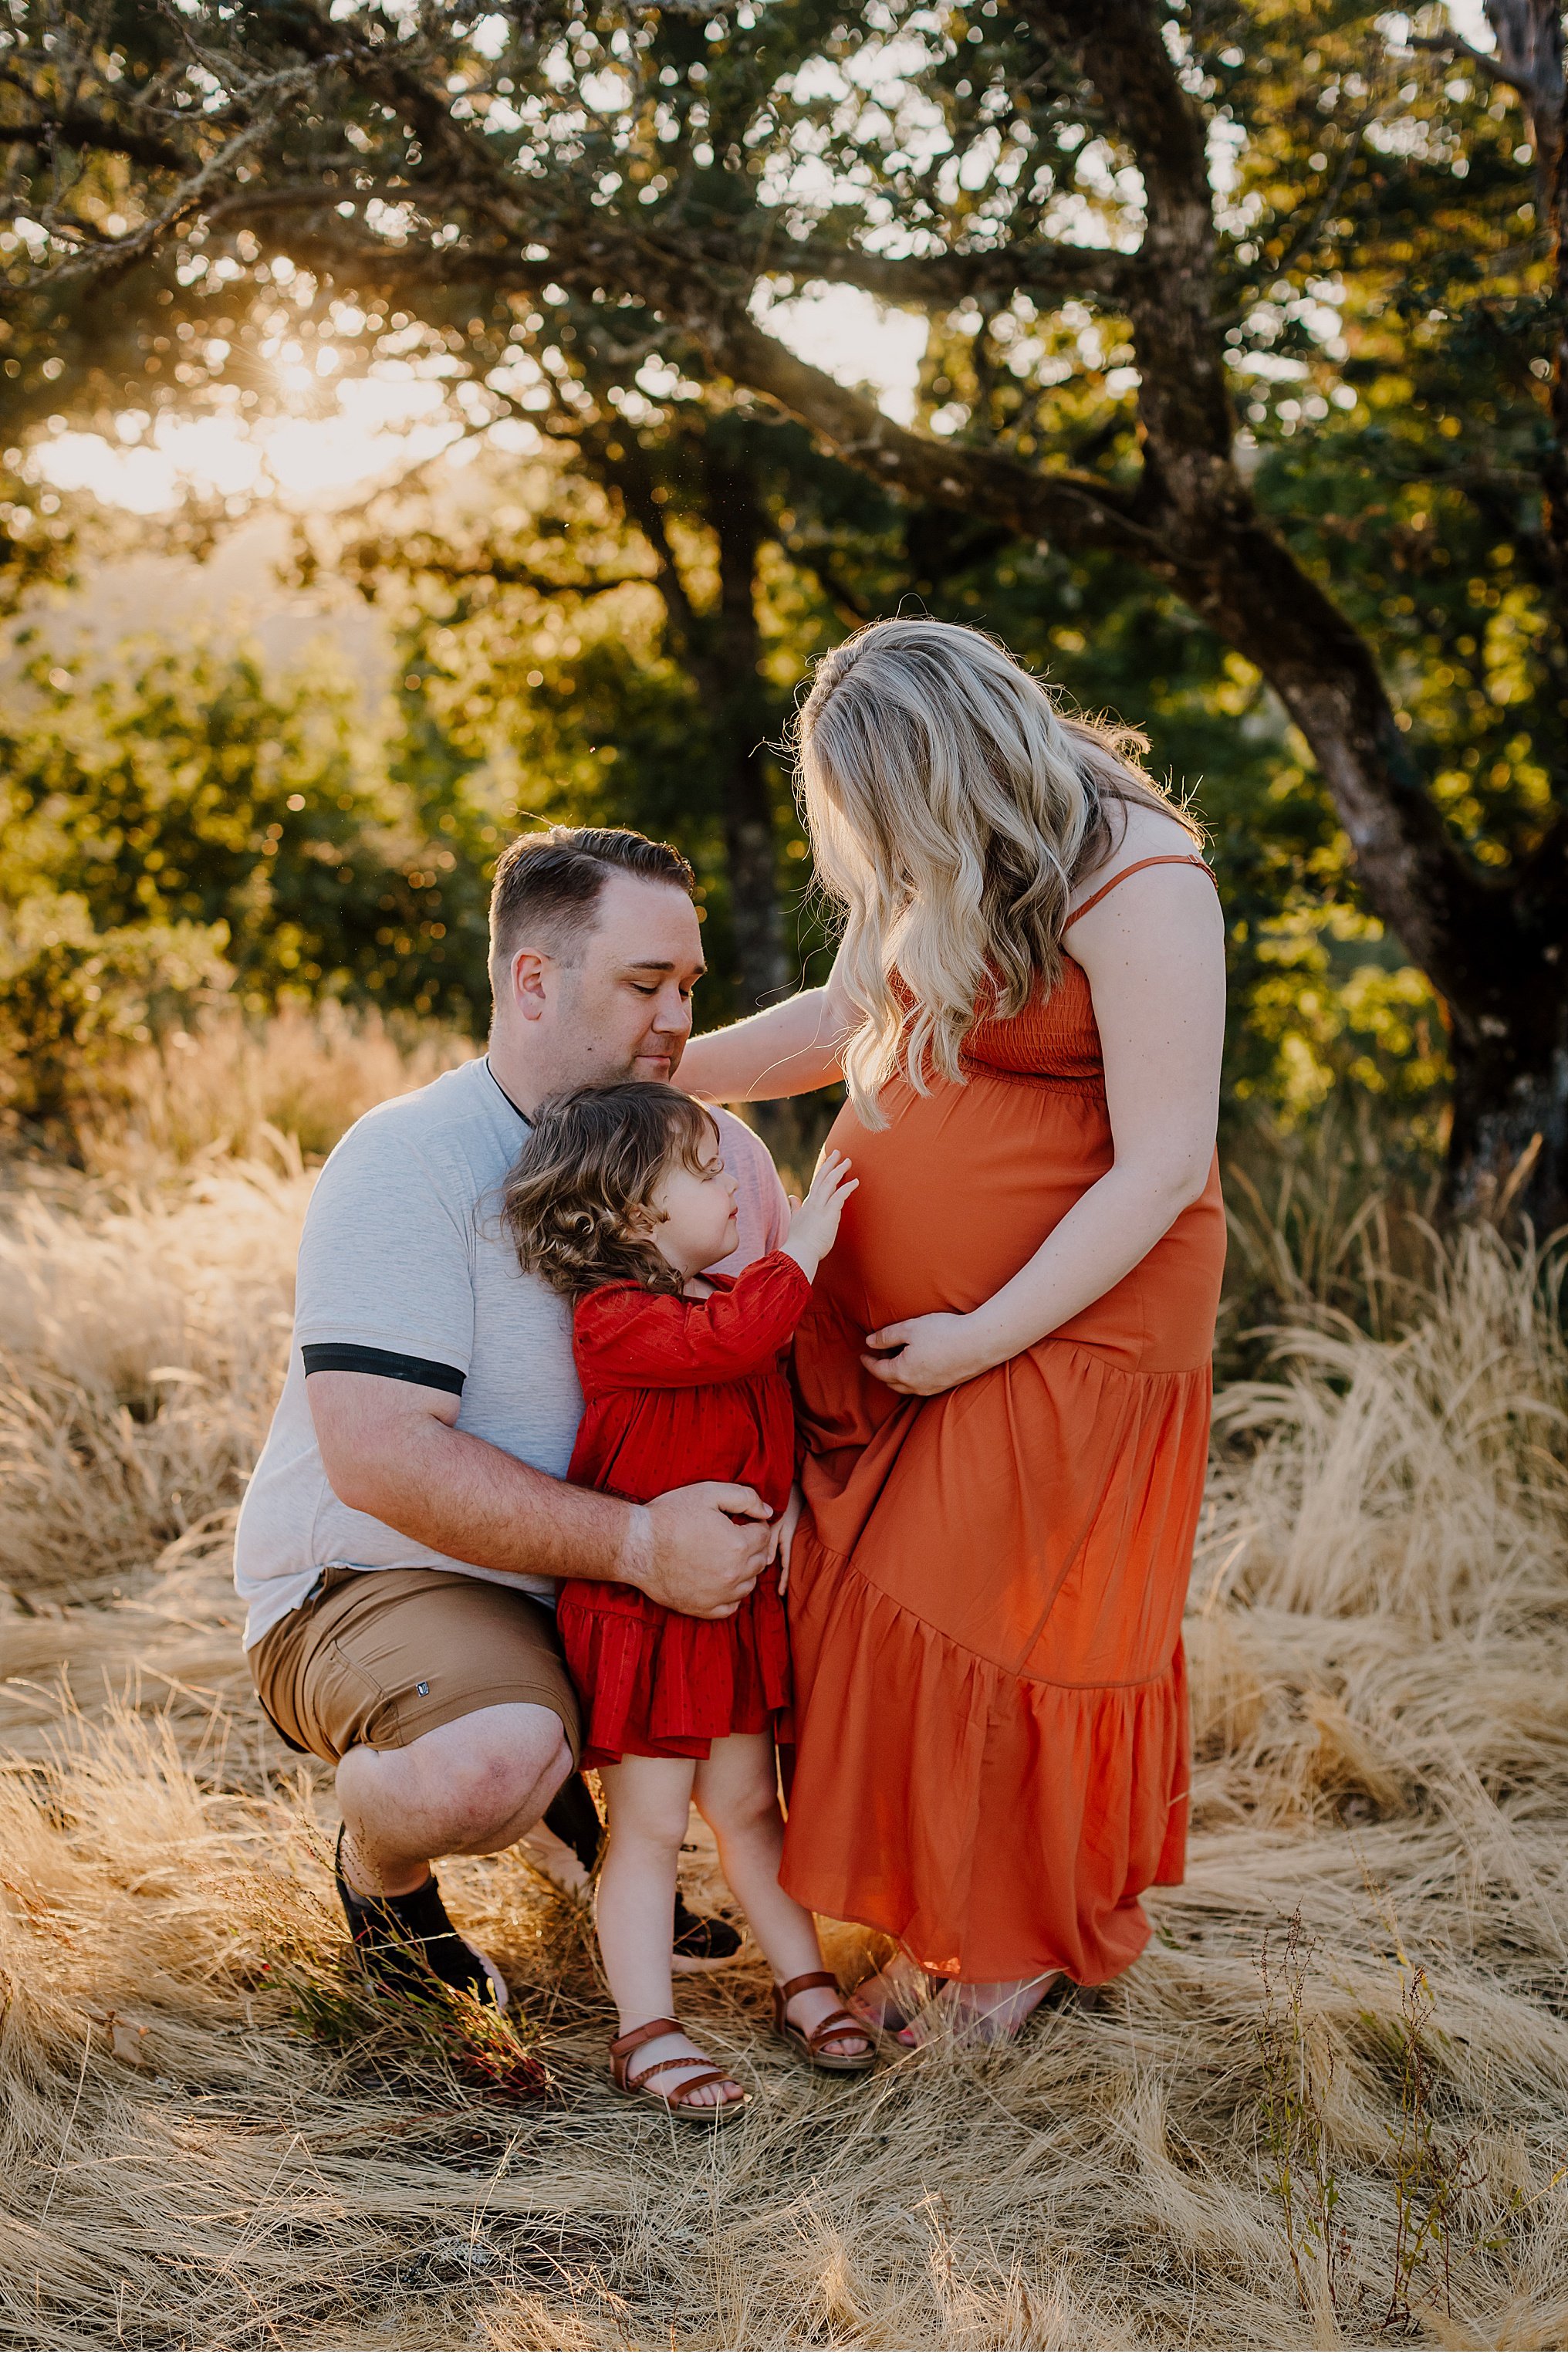 Capturing the Magic of Maternity: Photo Shoot Ideas and Outfit